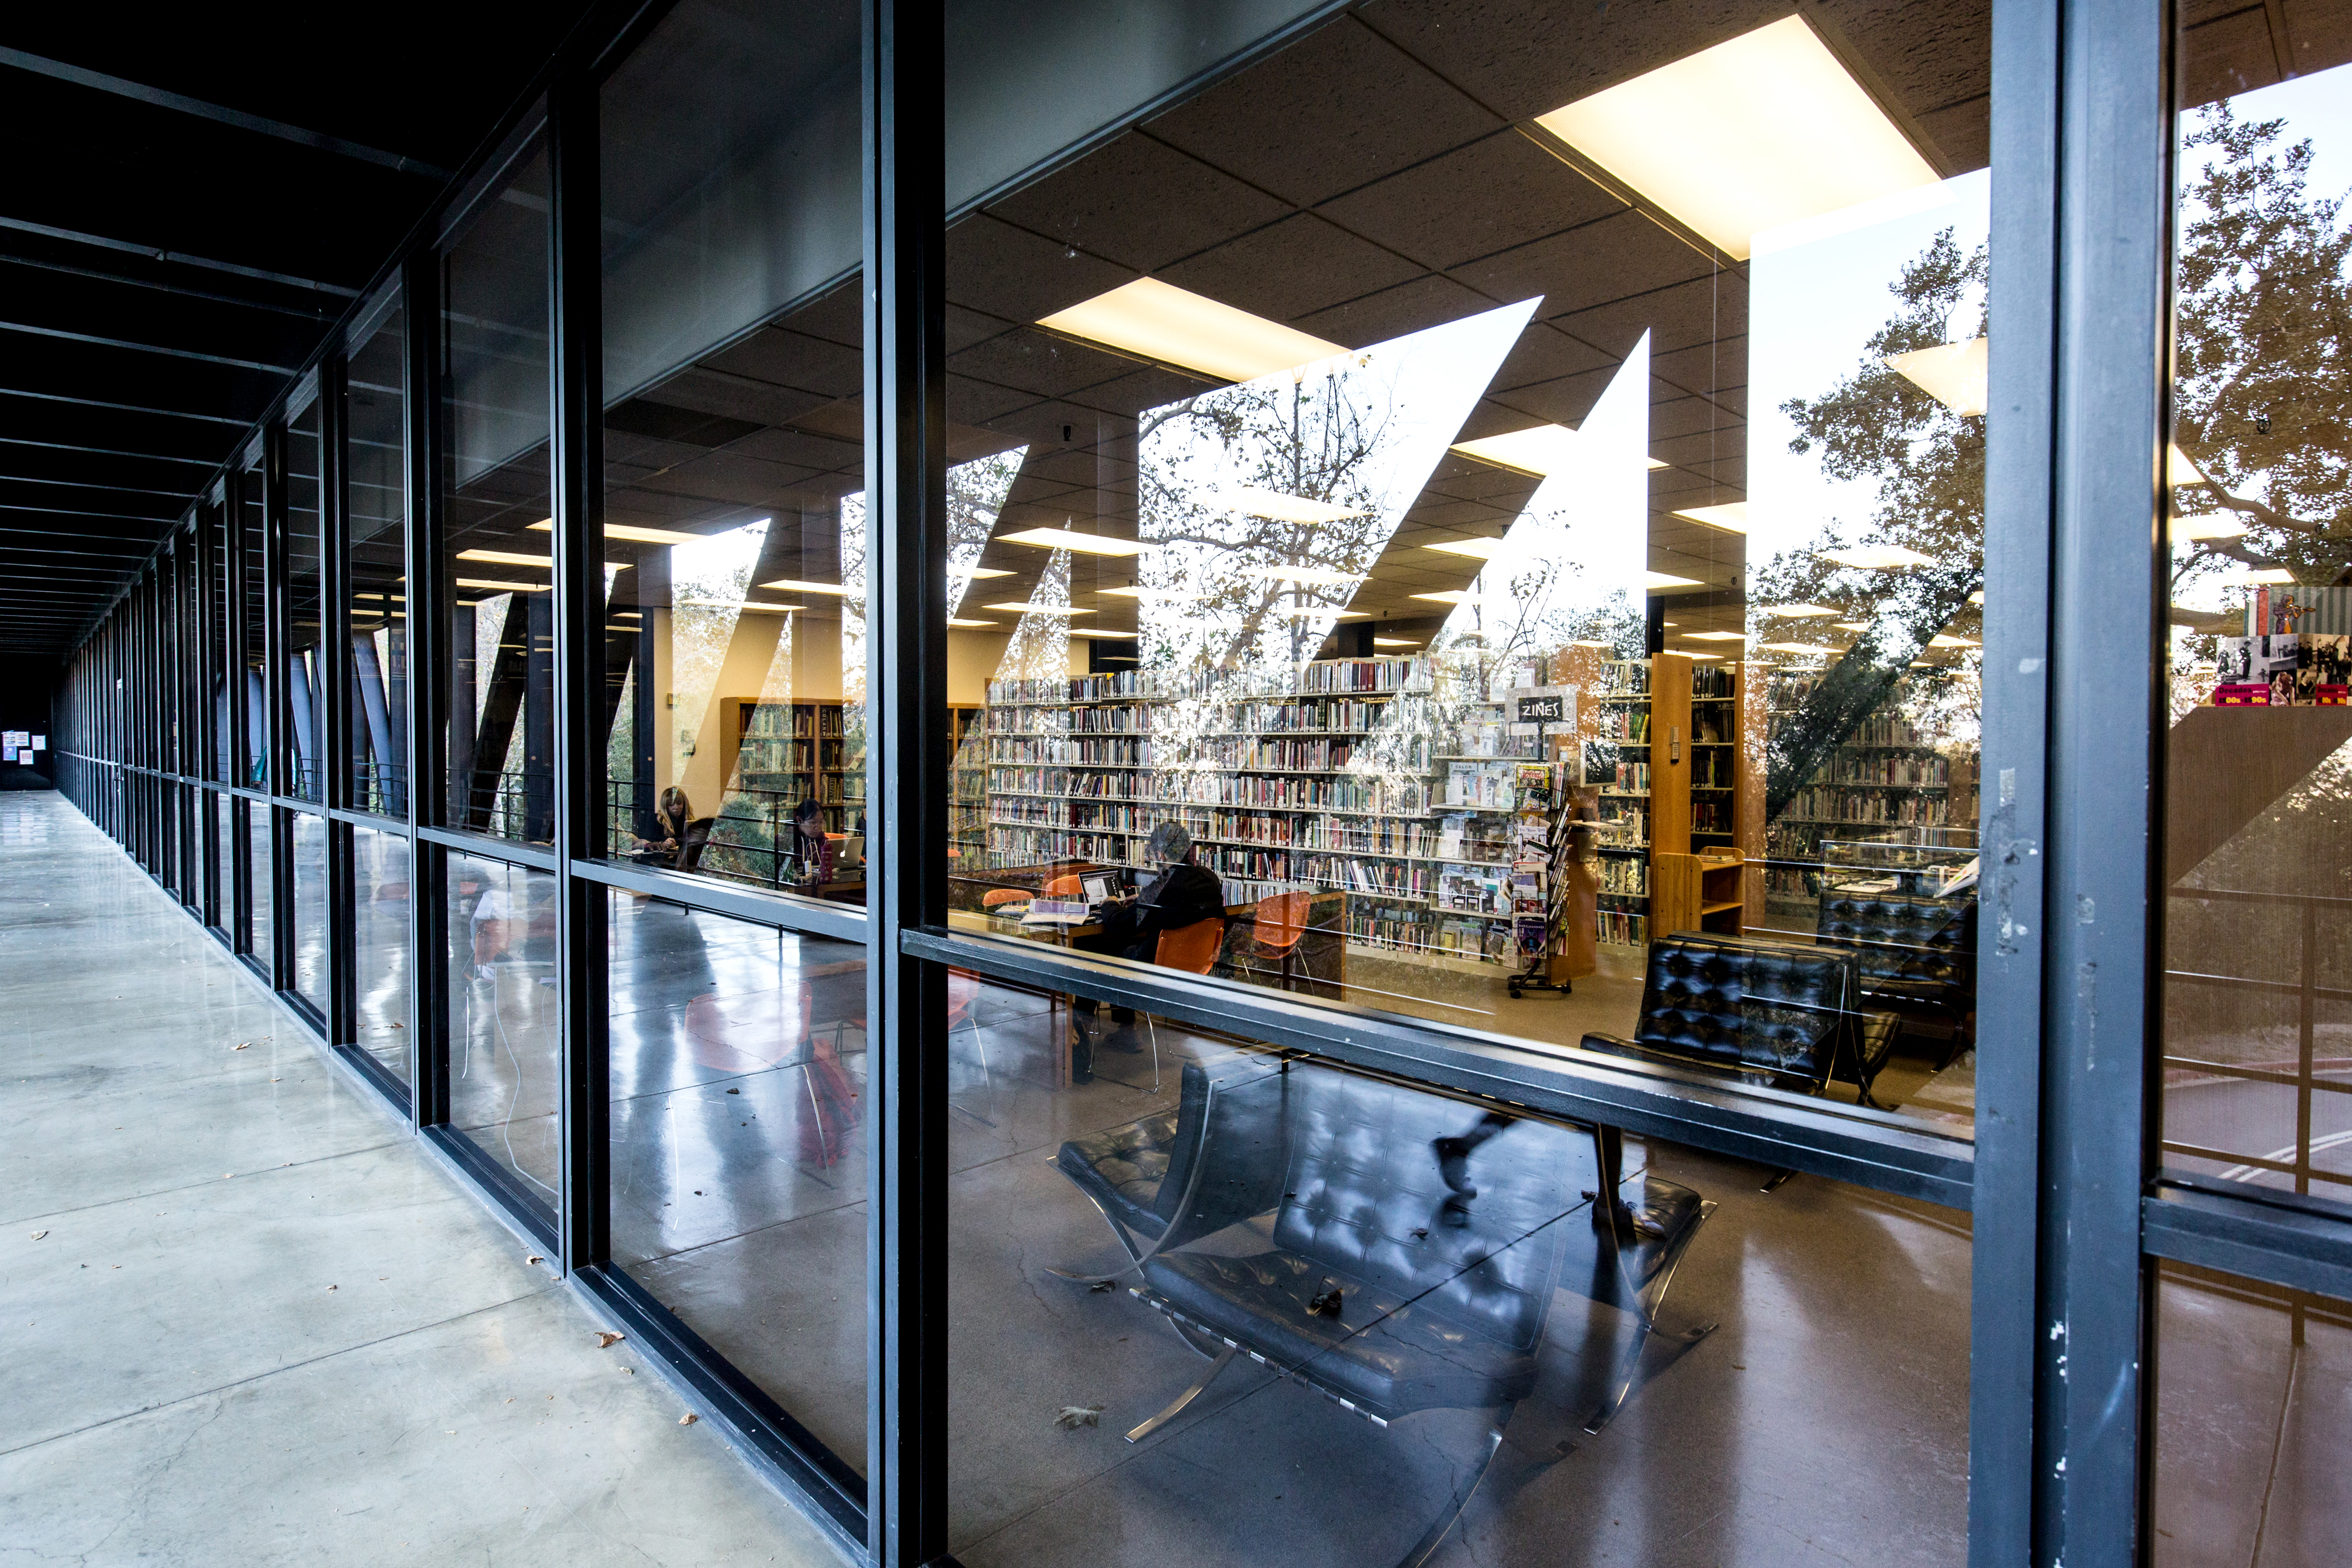 A series of windows looking into the library at ArtCenter College of Design